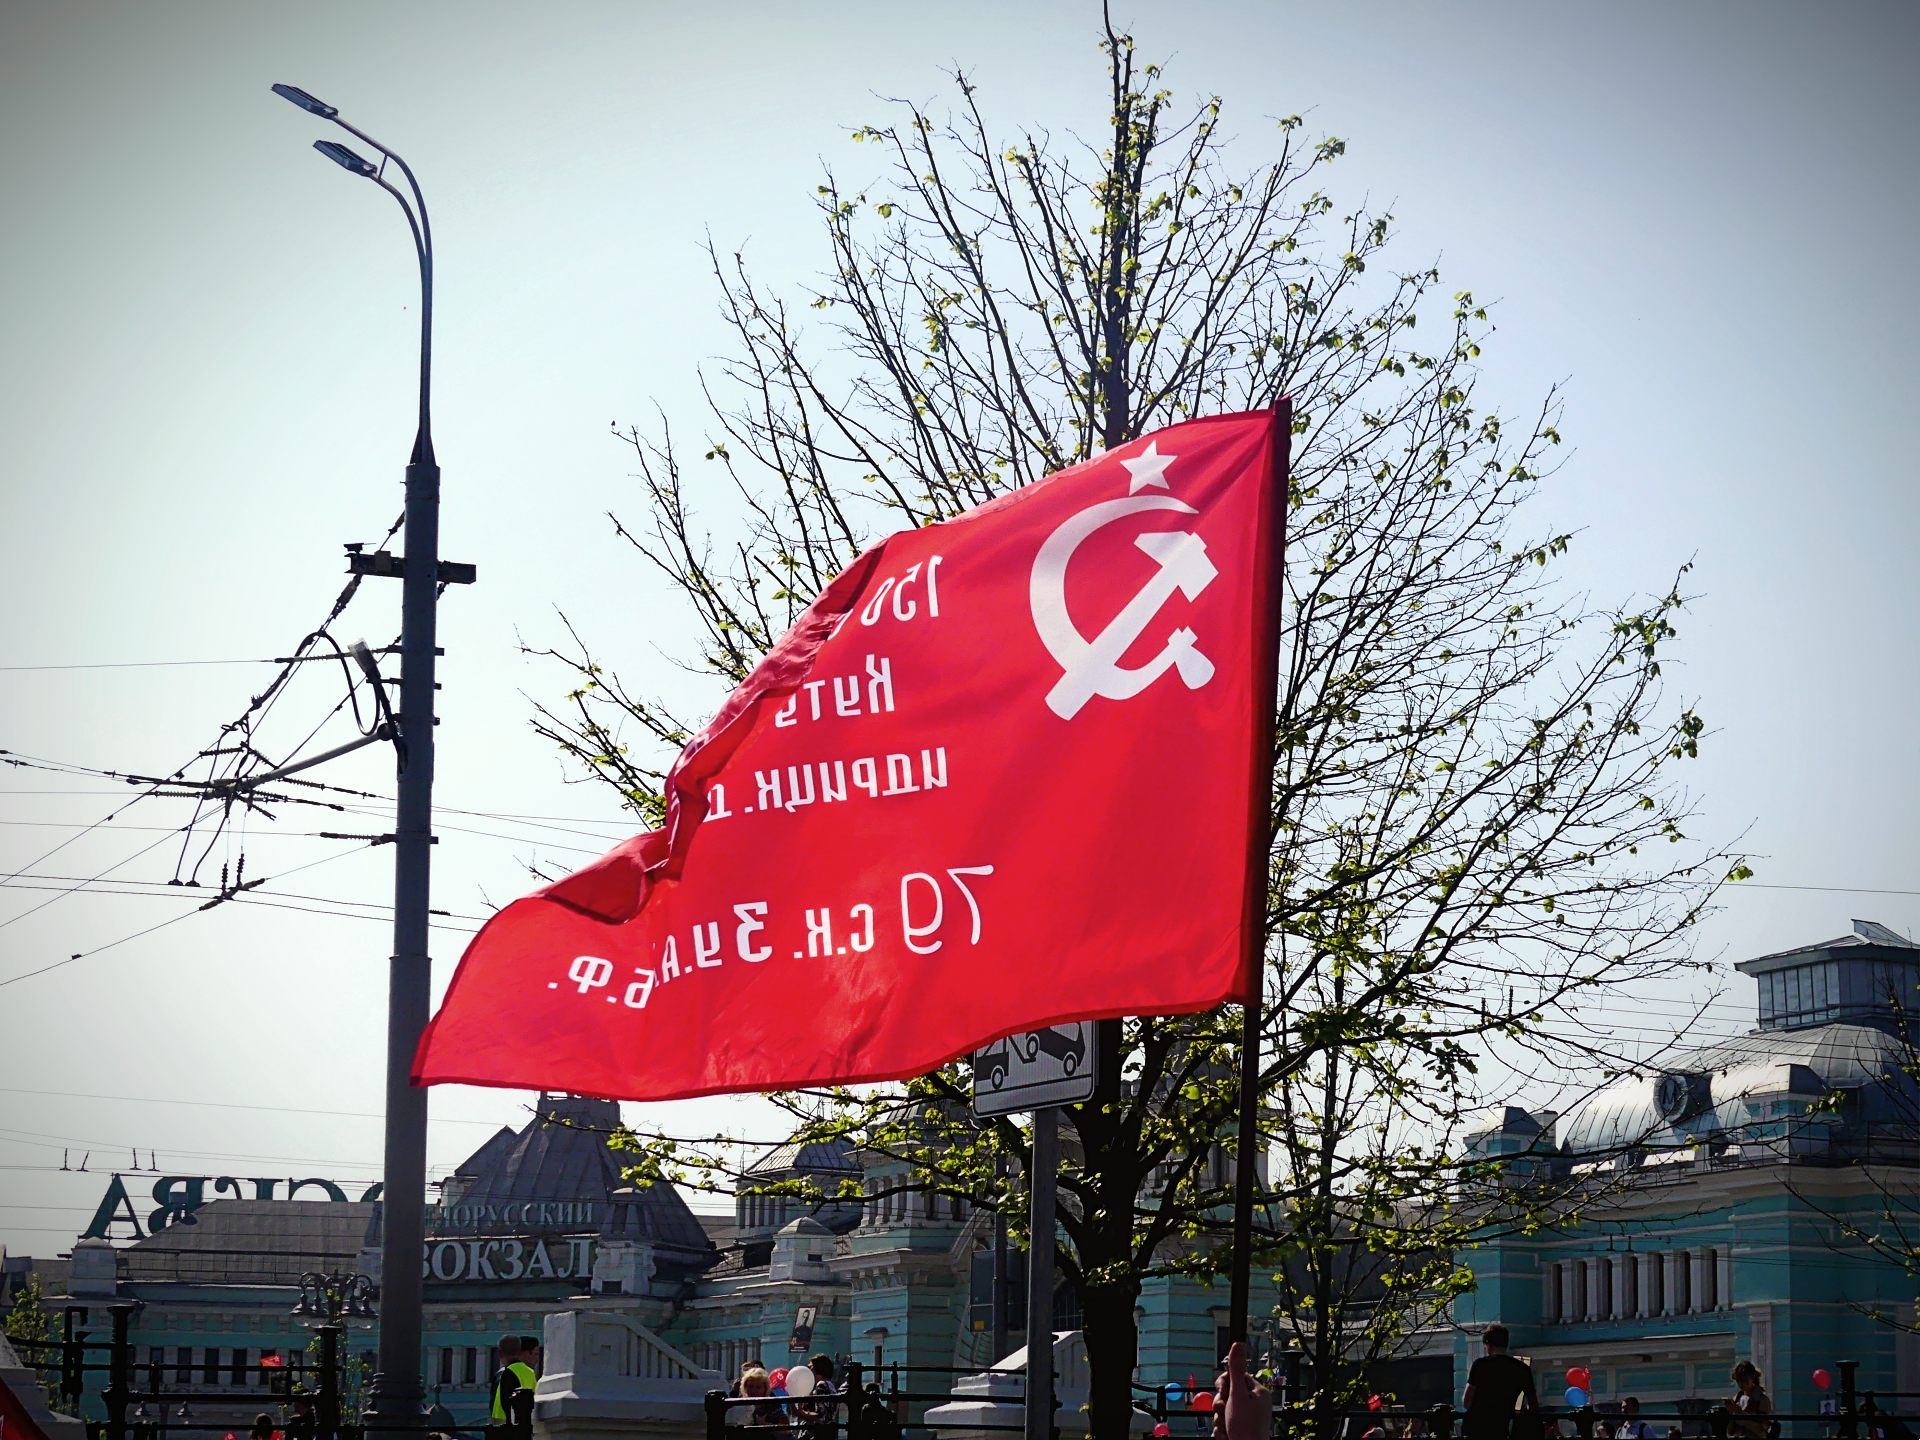  One of the many Soviet flags waving above the crowd. 